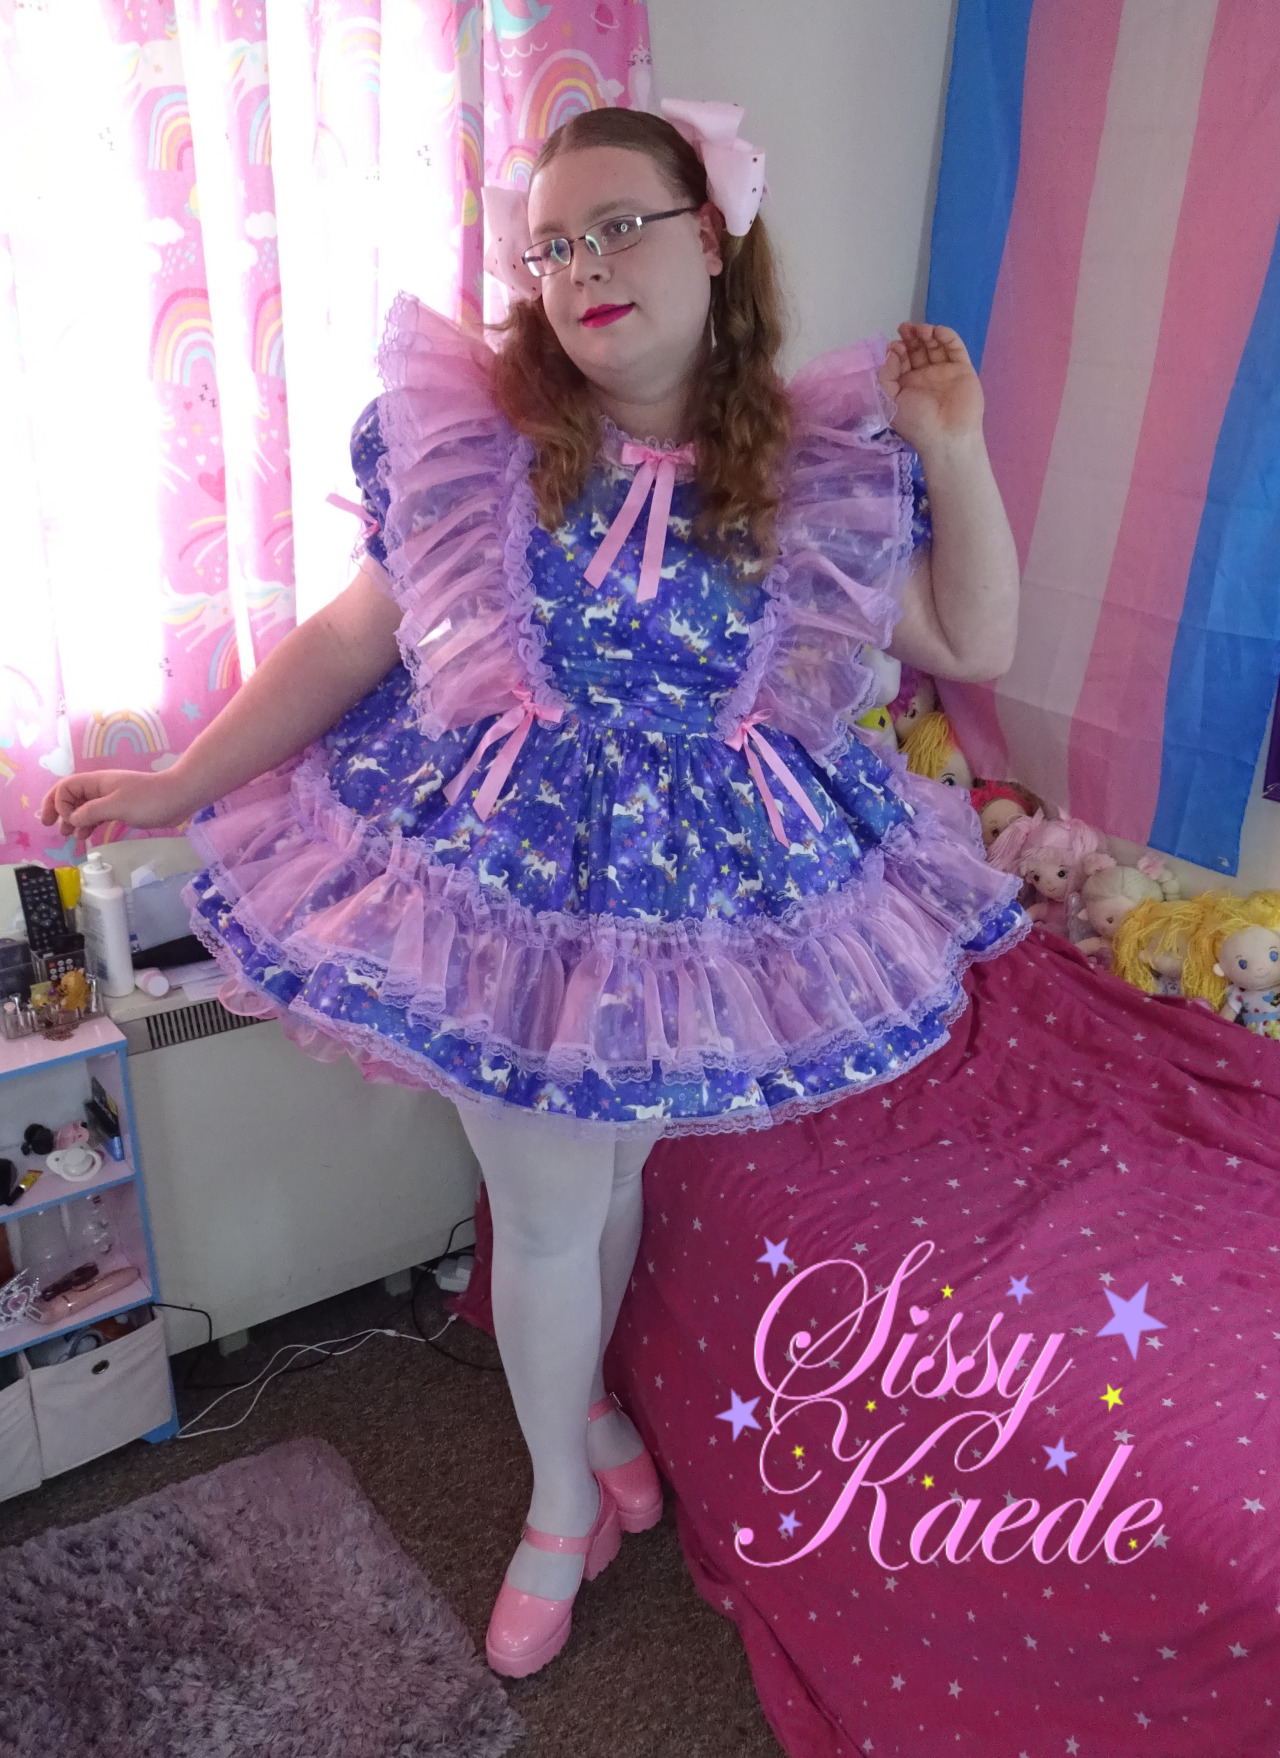 1 of 2 new dresses, both pony themed. So happy putting this on and wearing it, just feels so right and natural to be encased in frills and petticoats hehe.Nothing makes for a great day like frilly pink prissy dresses, if onlyit was exceptable day wear out and about lol. 